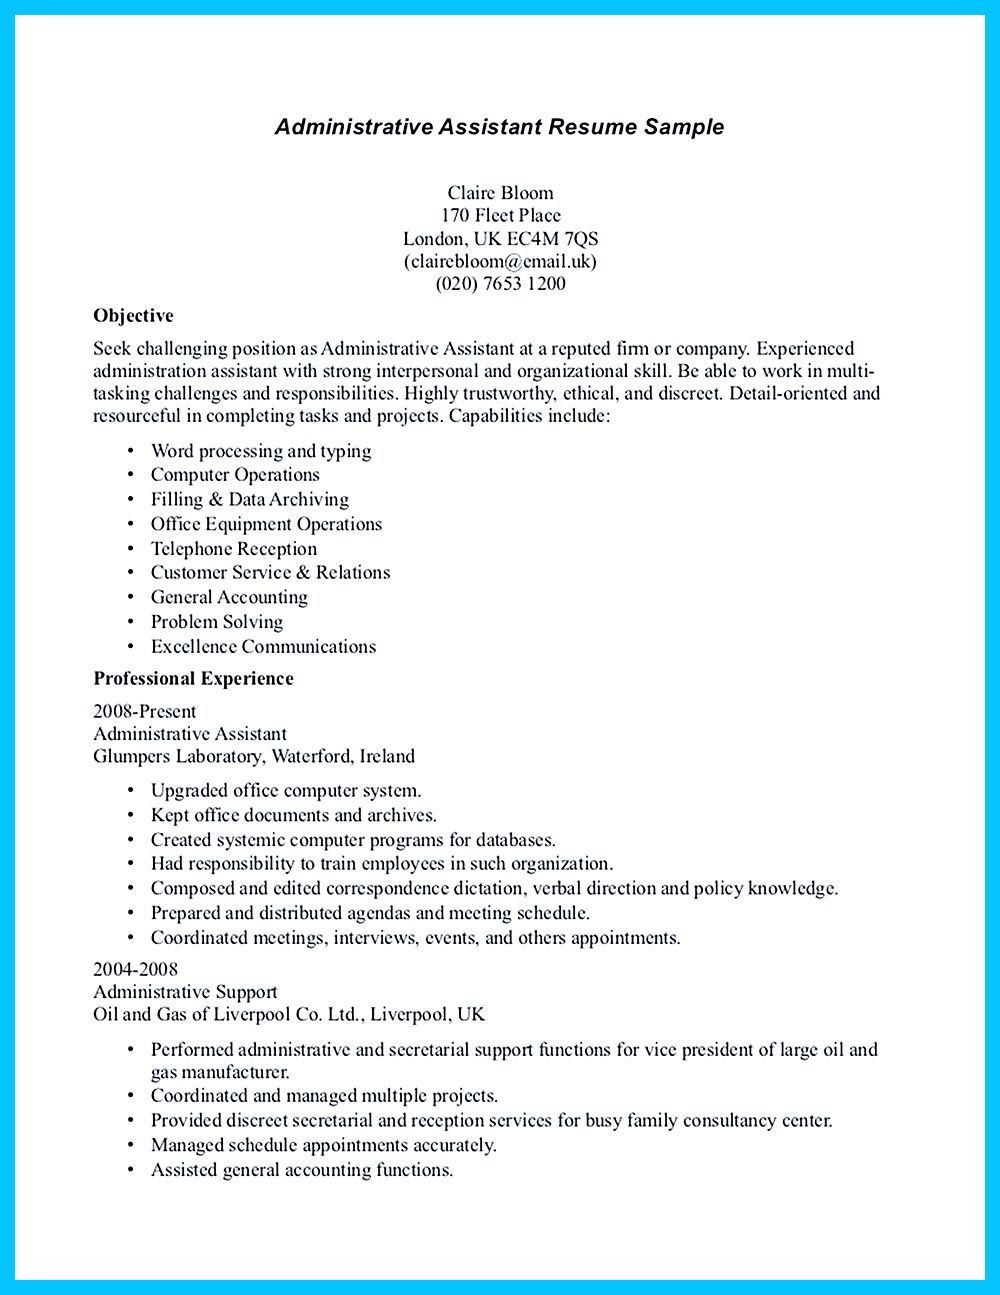 Entry Level Administrative assistant Resume Templates In Writing Entry Level Administrative assistant Resume, You Need …